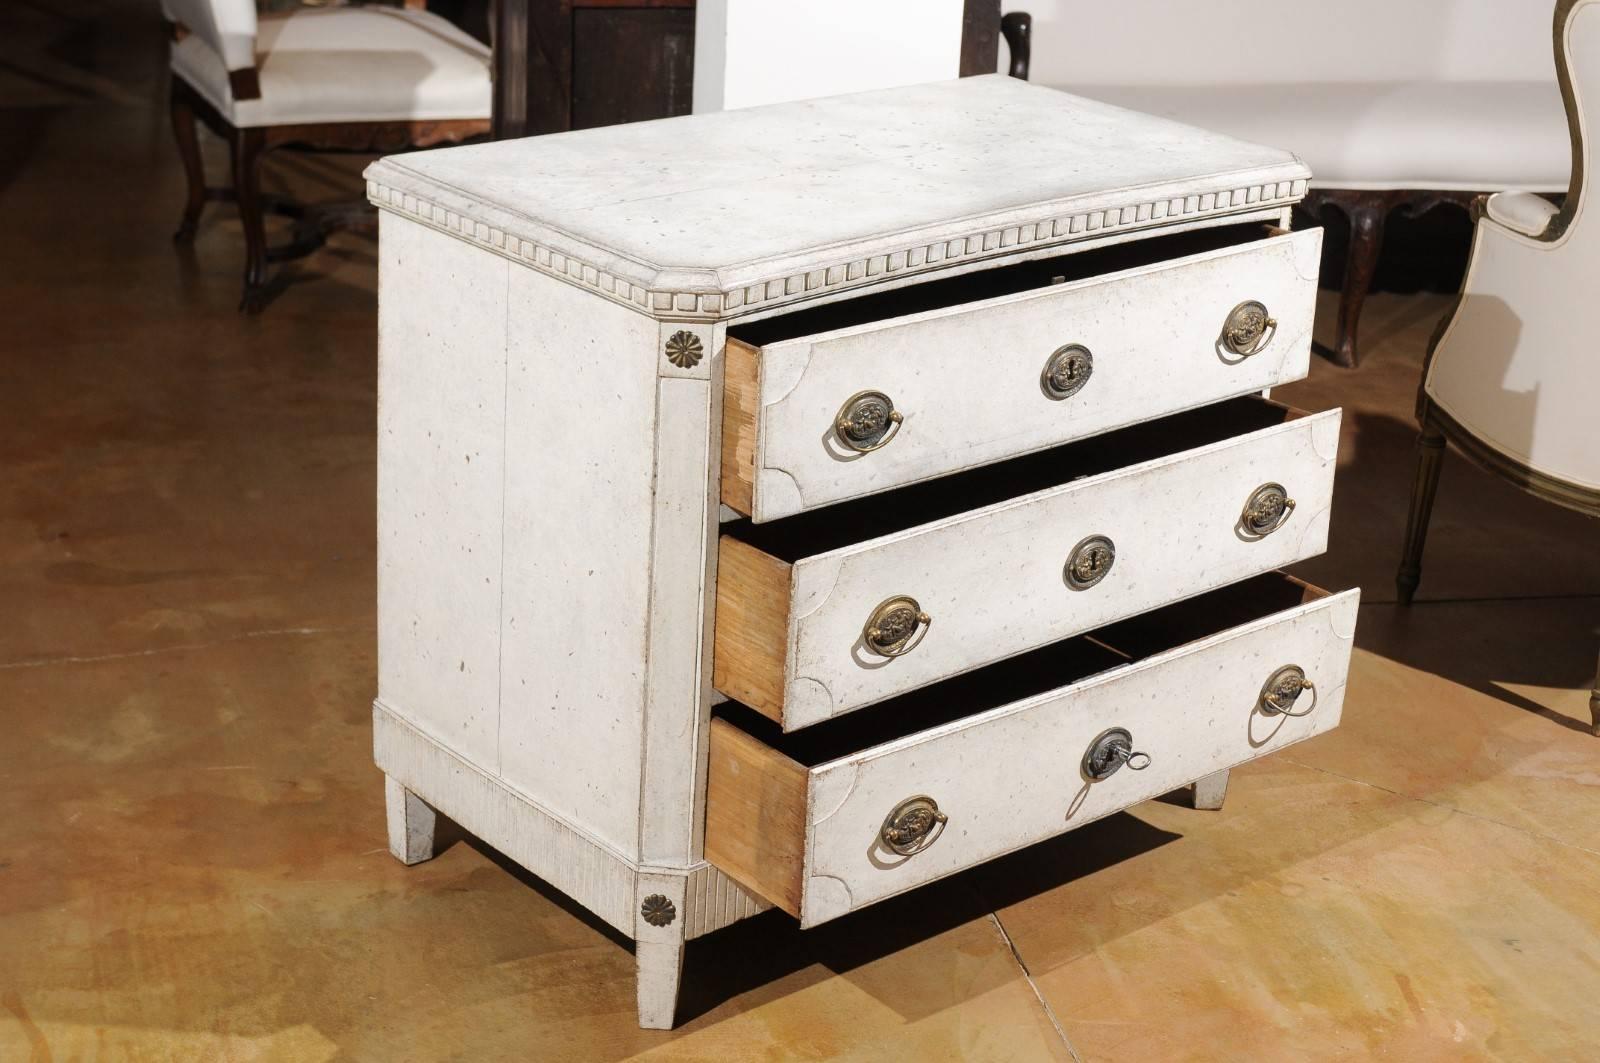 Hand-Painted 1810s Swedish Gustavian Period Painted Commode with Dentil Molding and Rosettes